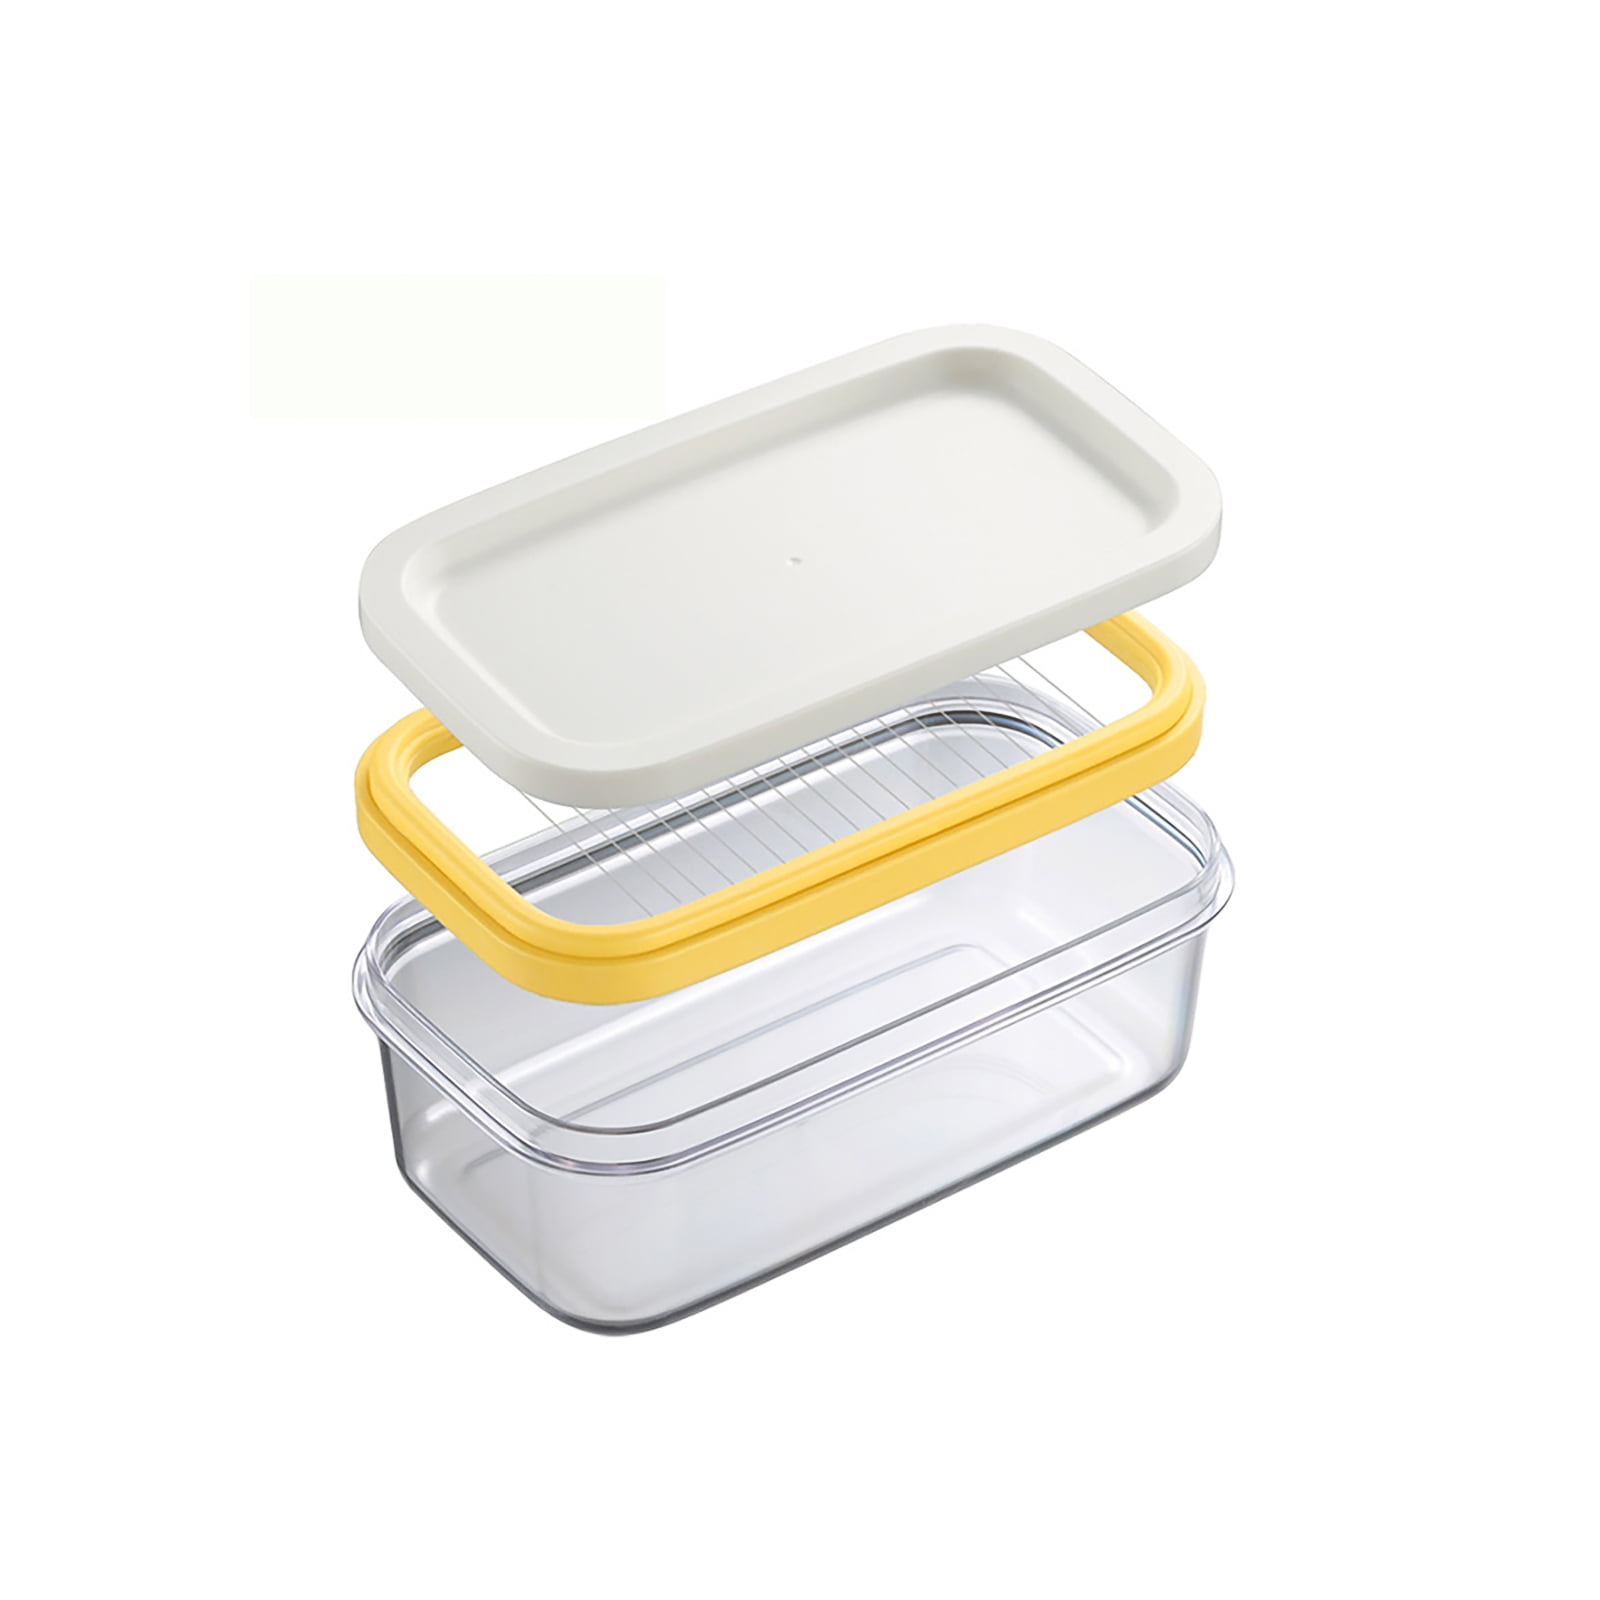 2 in 1 Plastic Butter Dish with Stainless Slicer for Easy Cutting Suitable for 8oz Or Two 4oz Sticks Butter 2 In 1 Clear Butter Container and Storage 